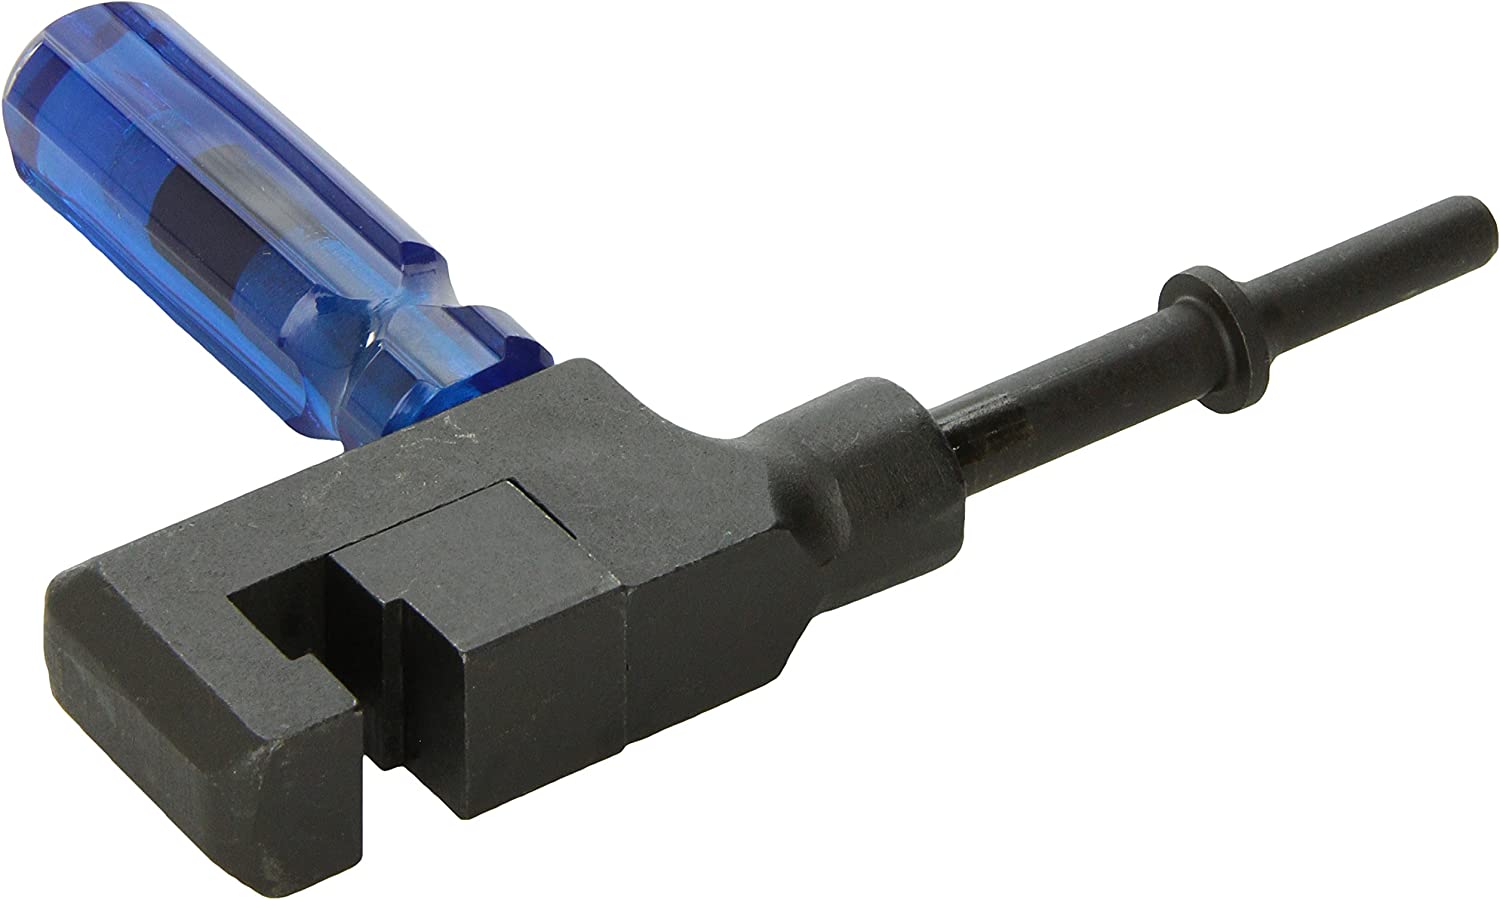 PNEUMATIC PANEL CRIMPER .401 SHANK by S & G TOOL AID 